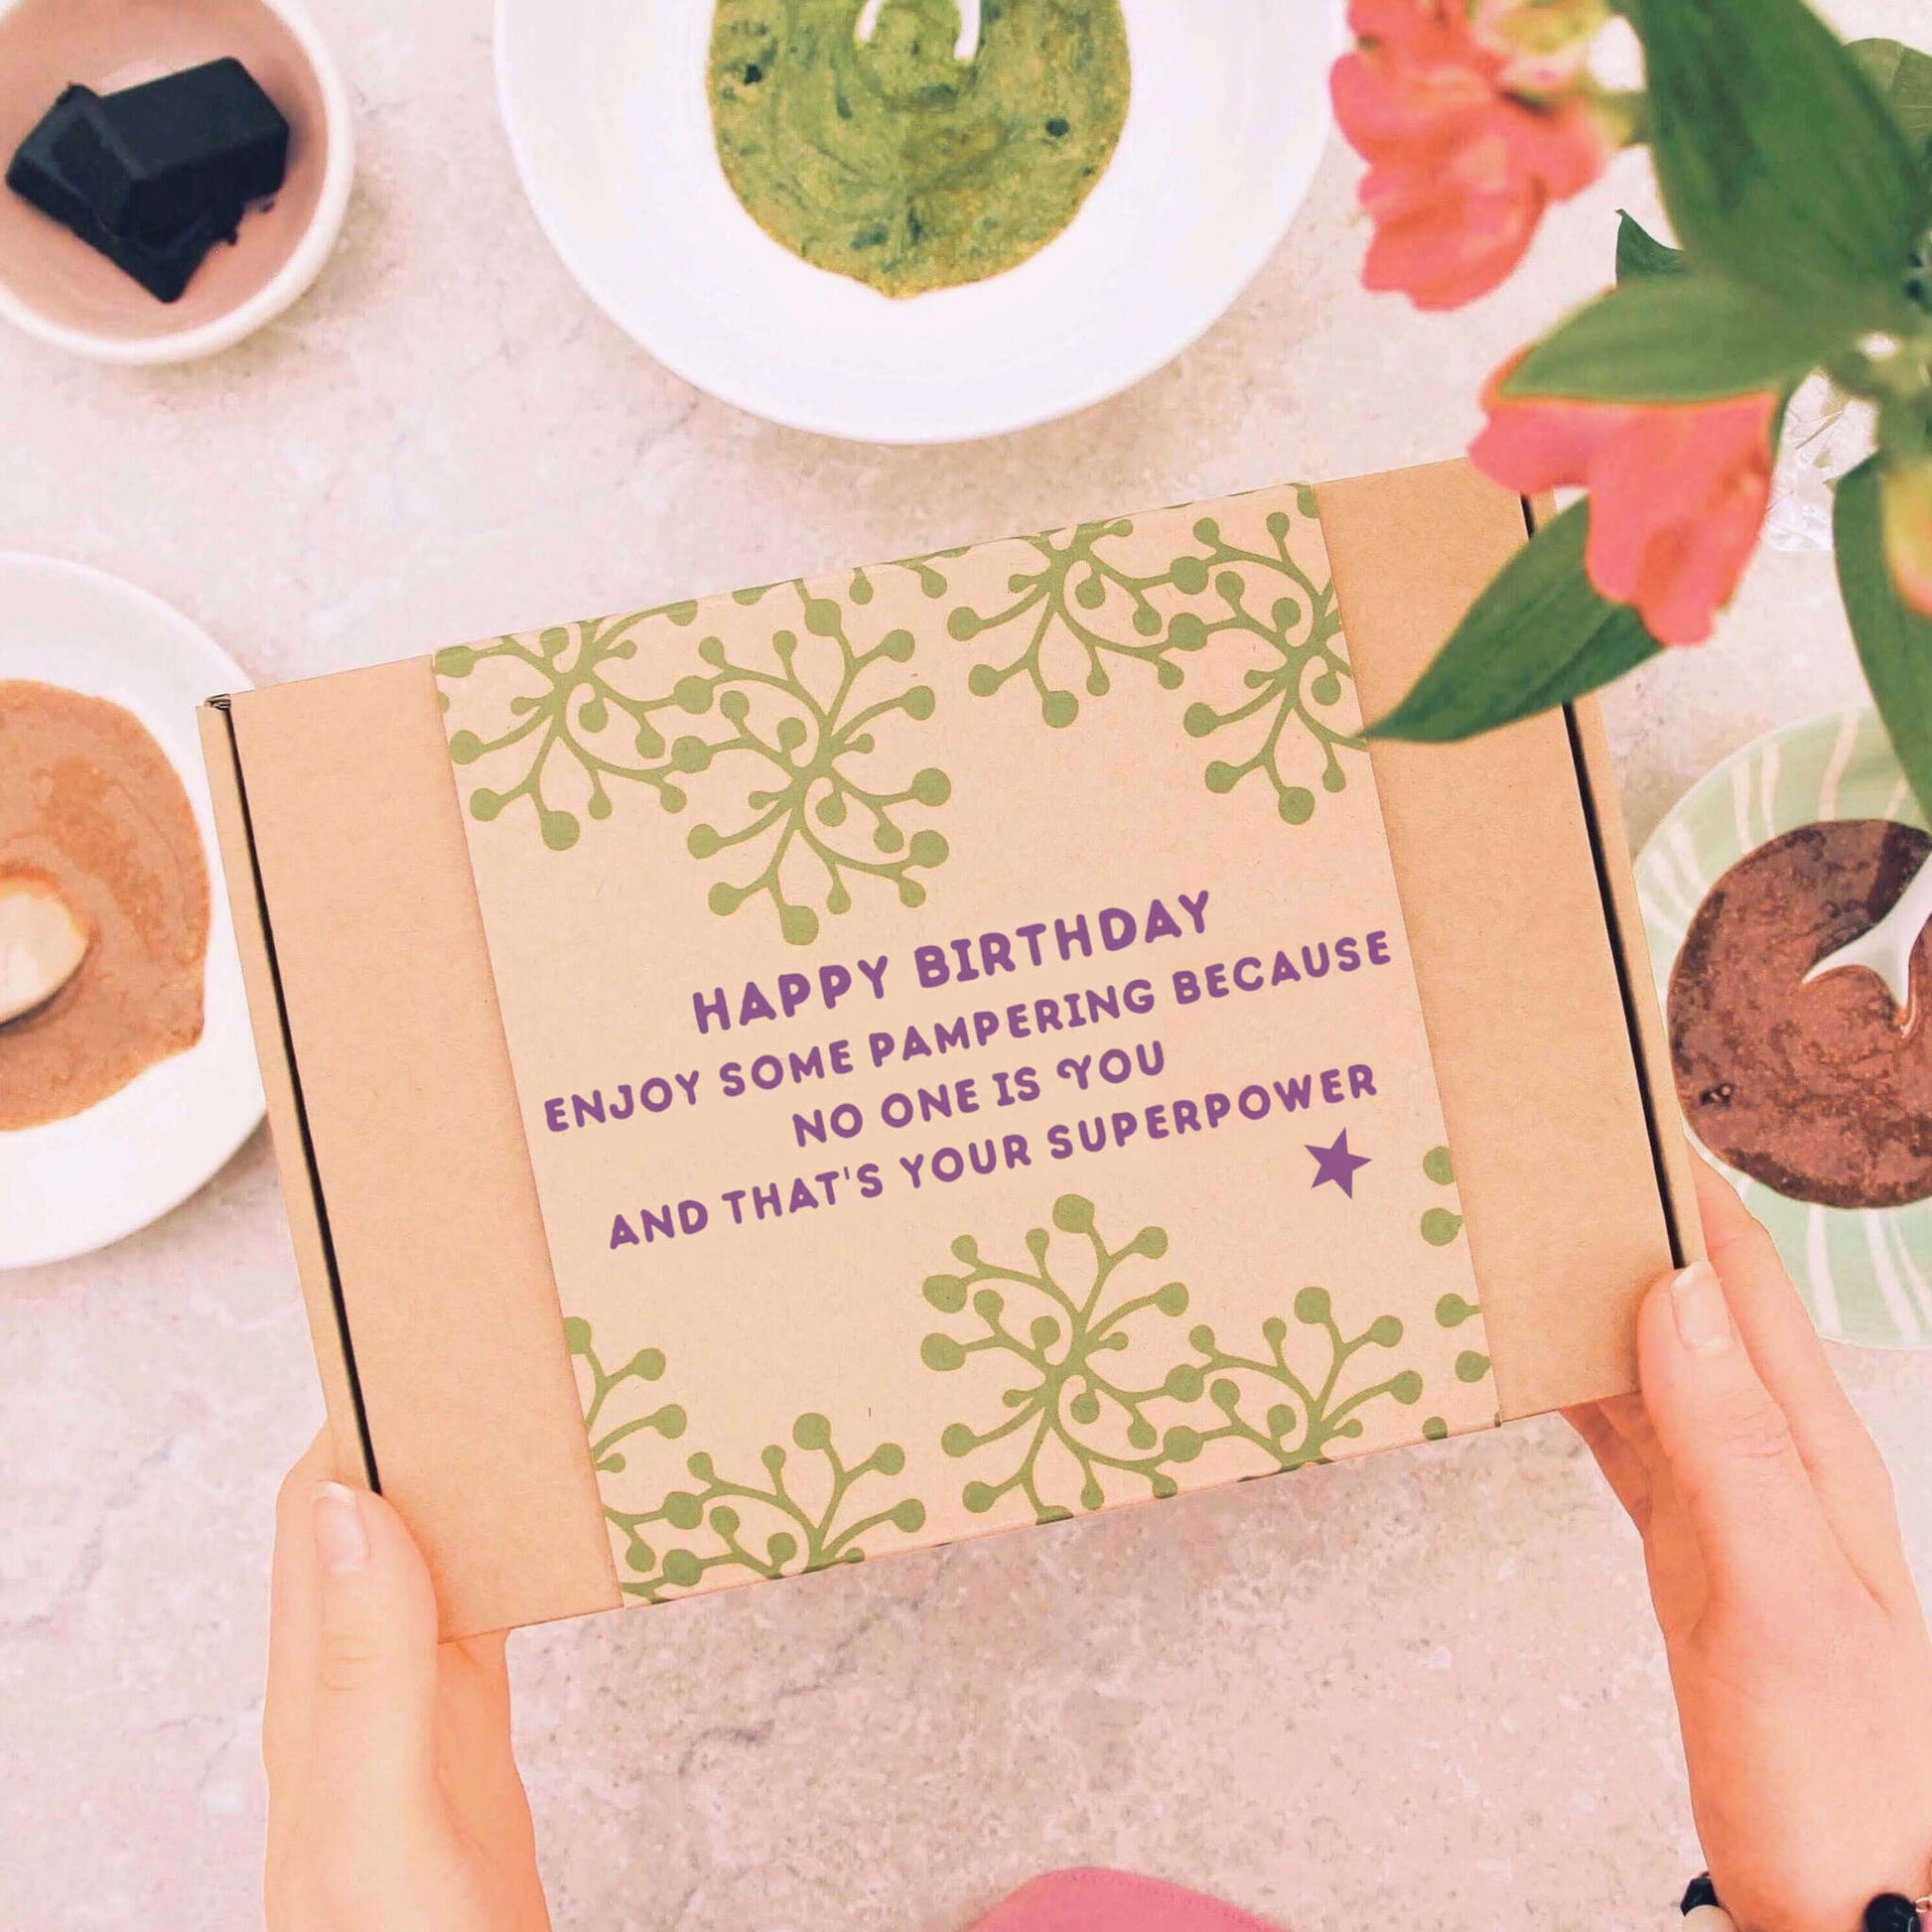 birthday letterbox gift with birthday gift message "happy birthday enjoy some pampering because no one is you and that's your superpower"